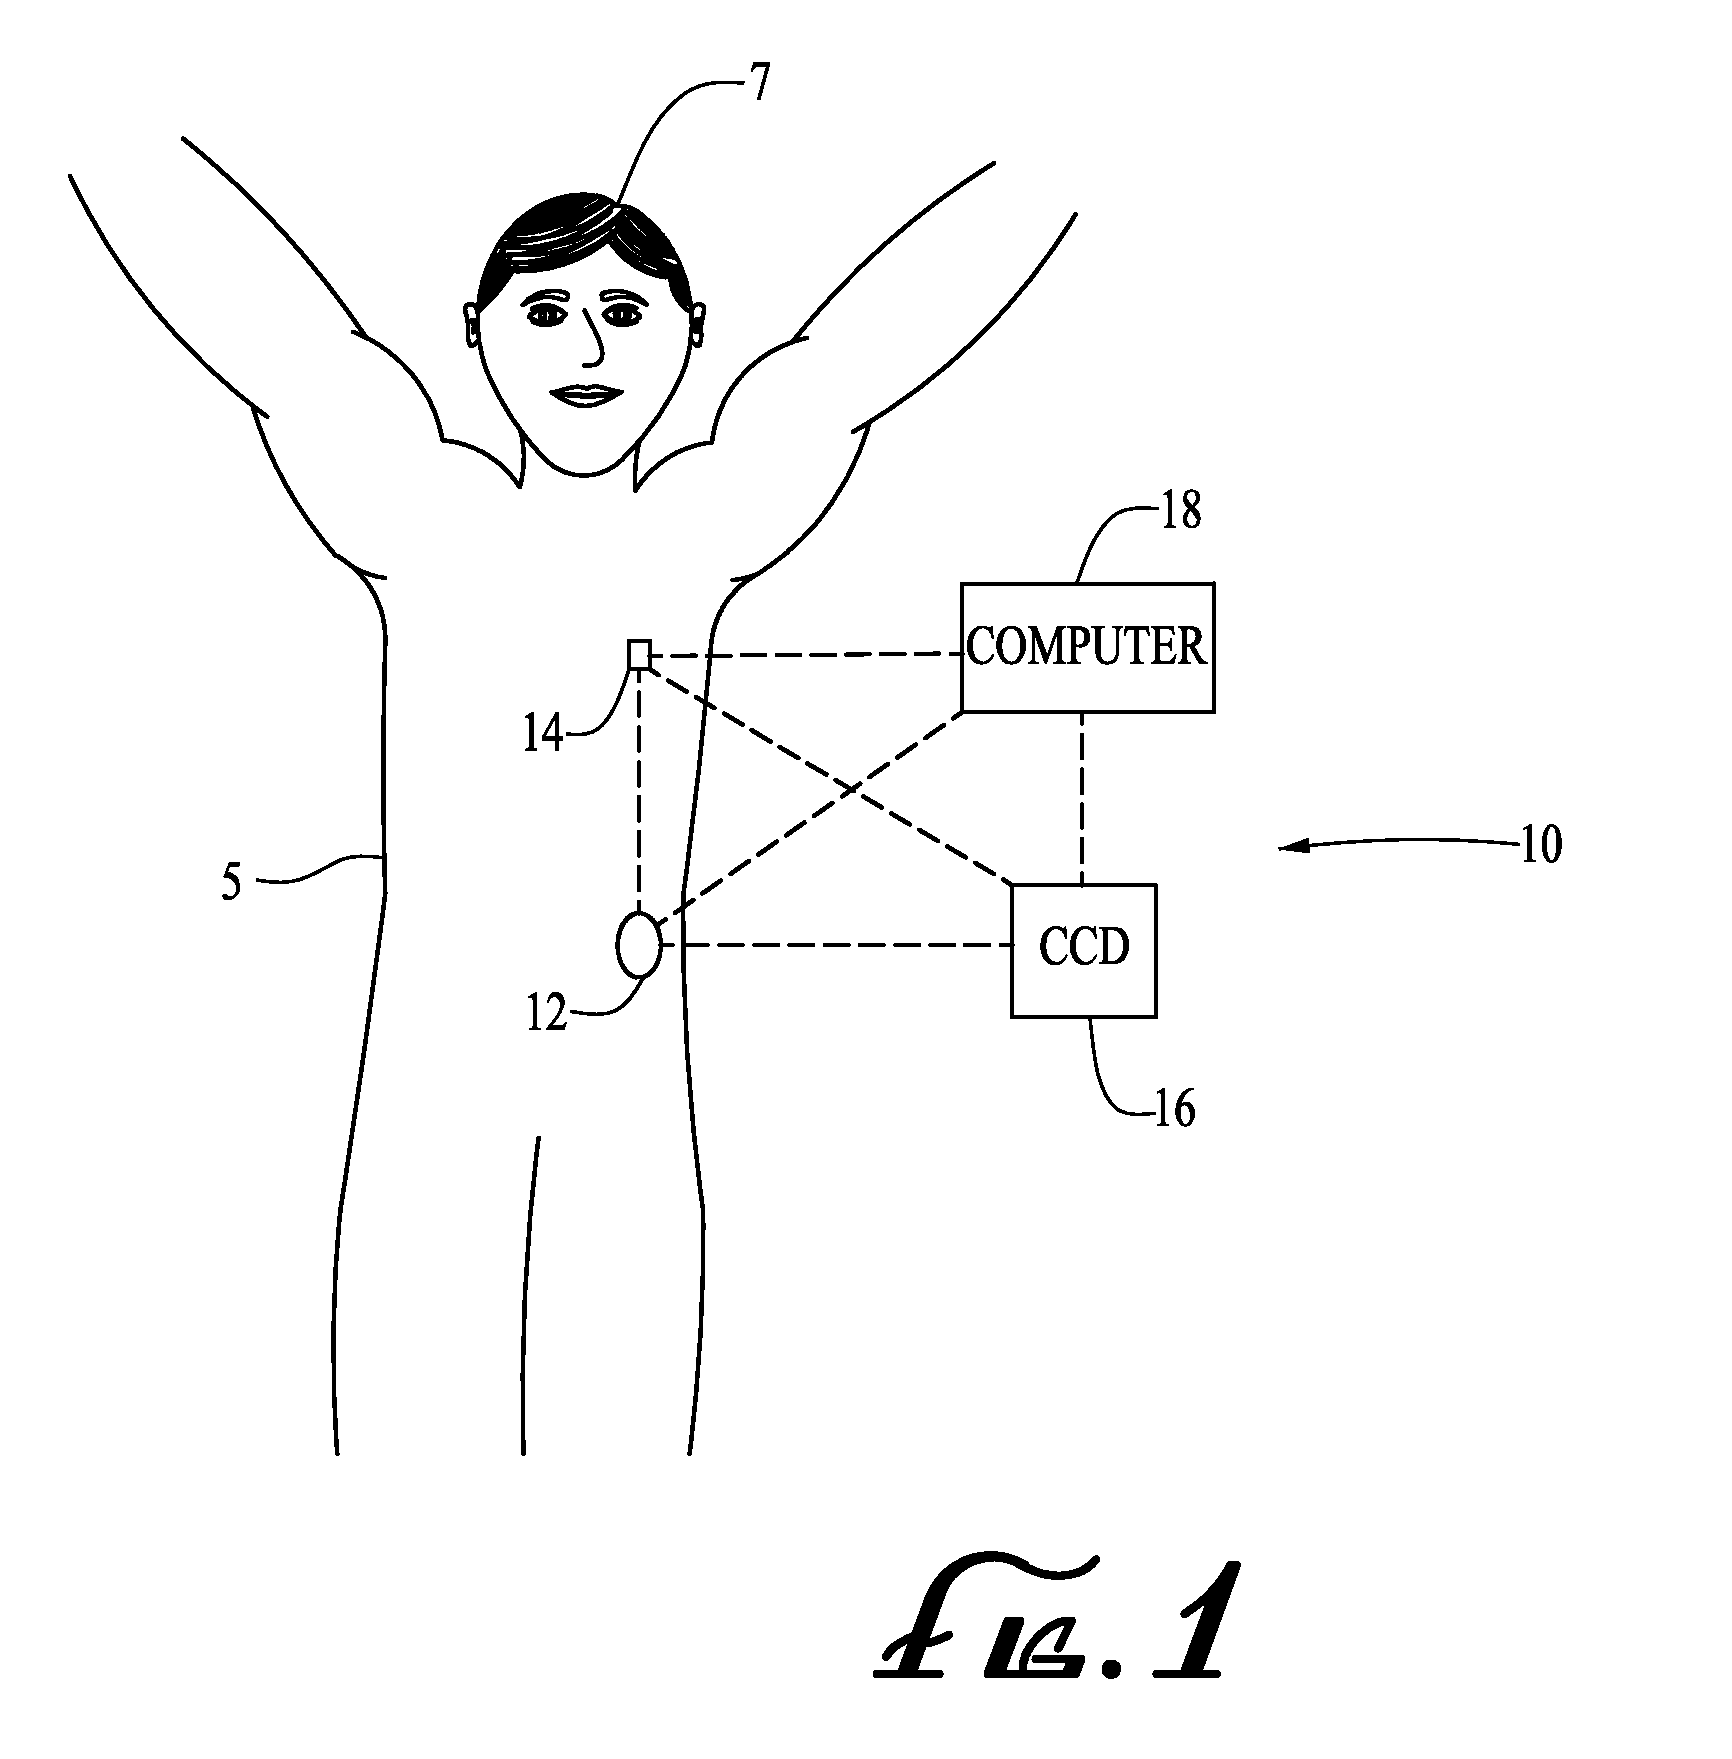 Engagement and sensing systems and methods